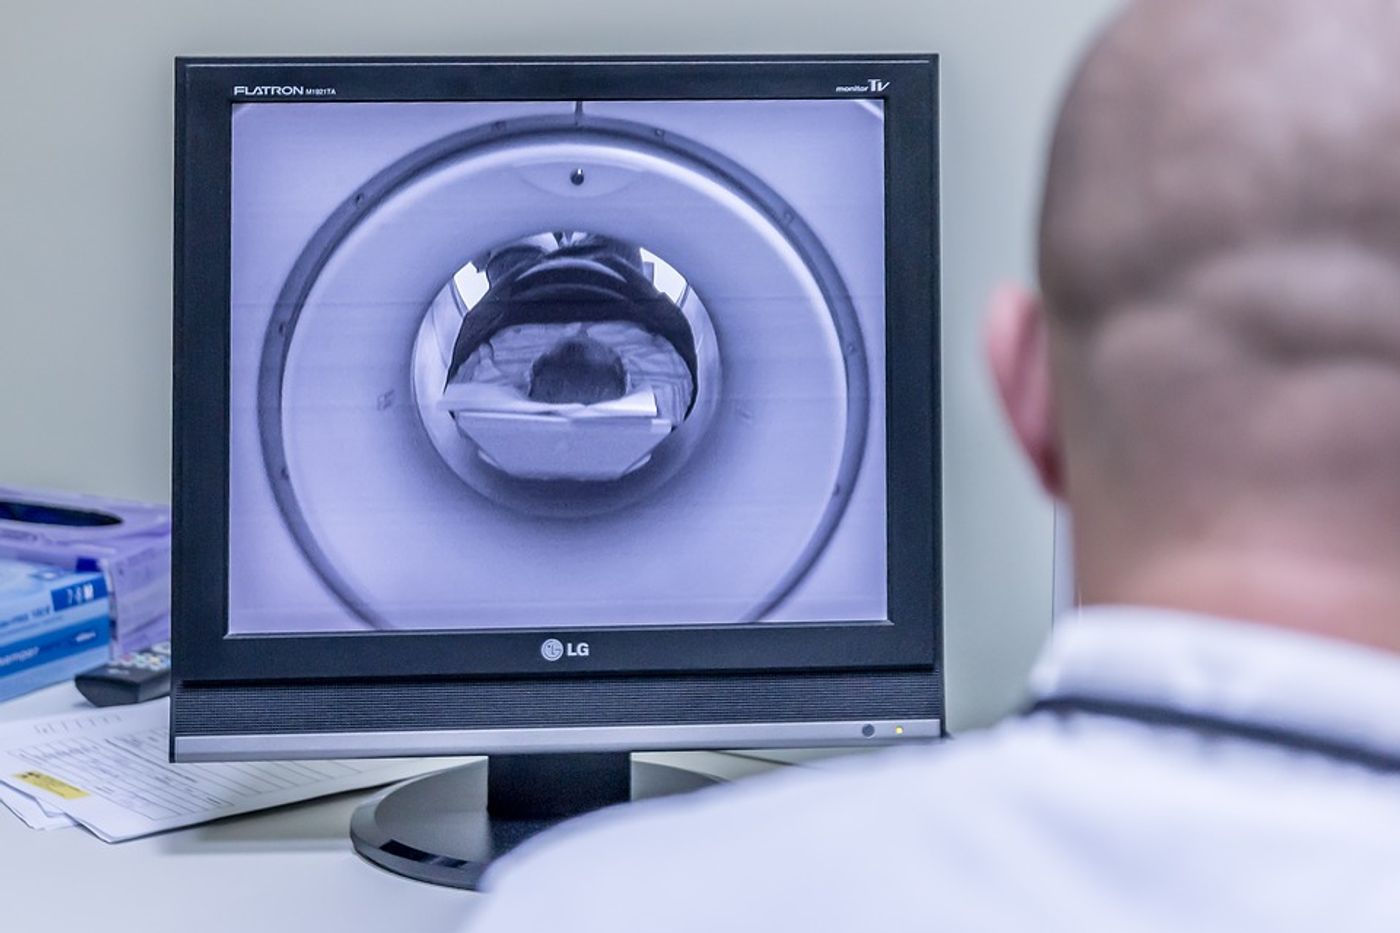 A new ultra-high-strength MRI was approved by the FDA in 2017.